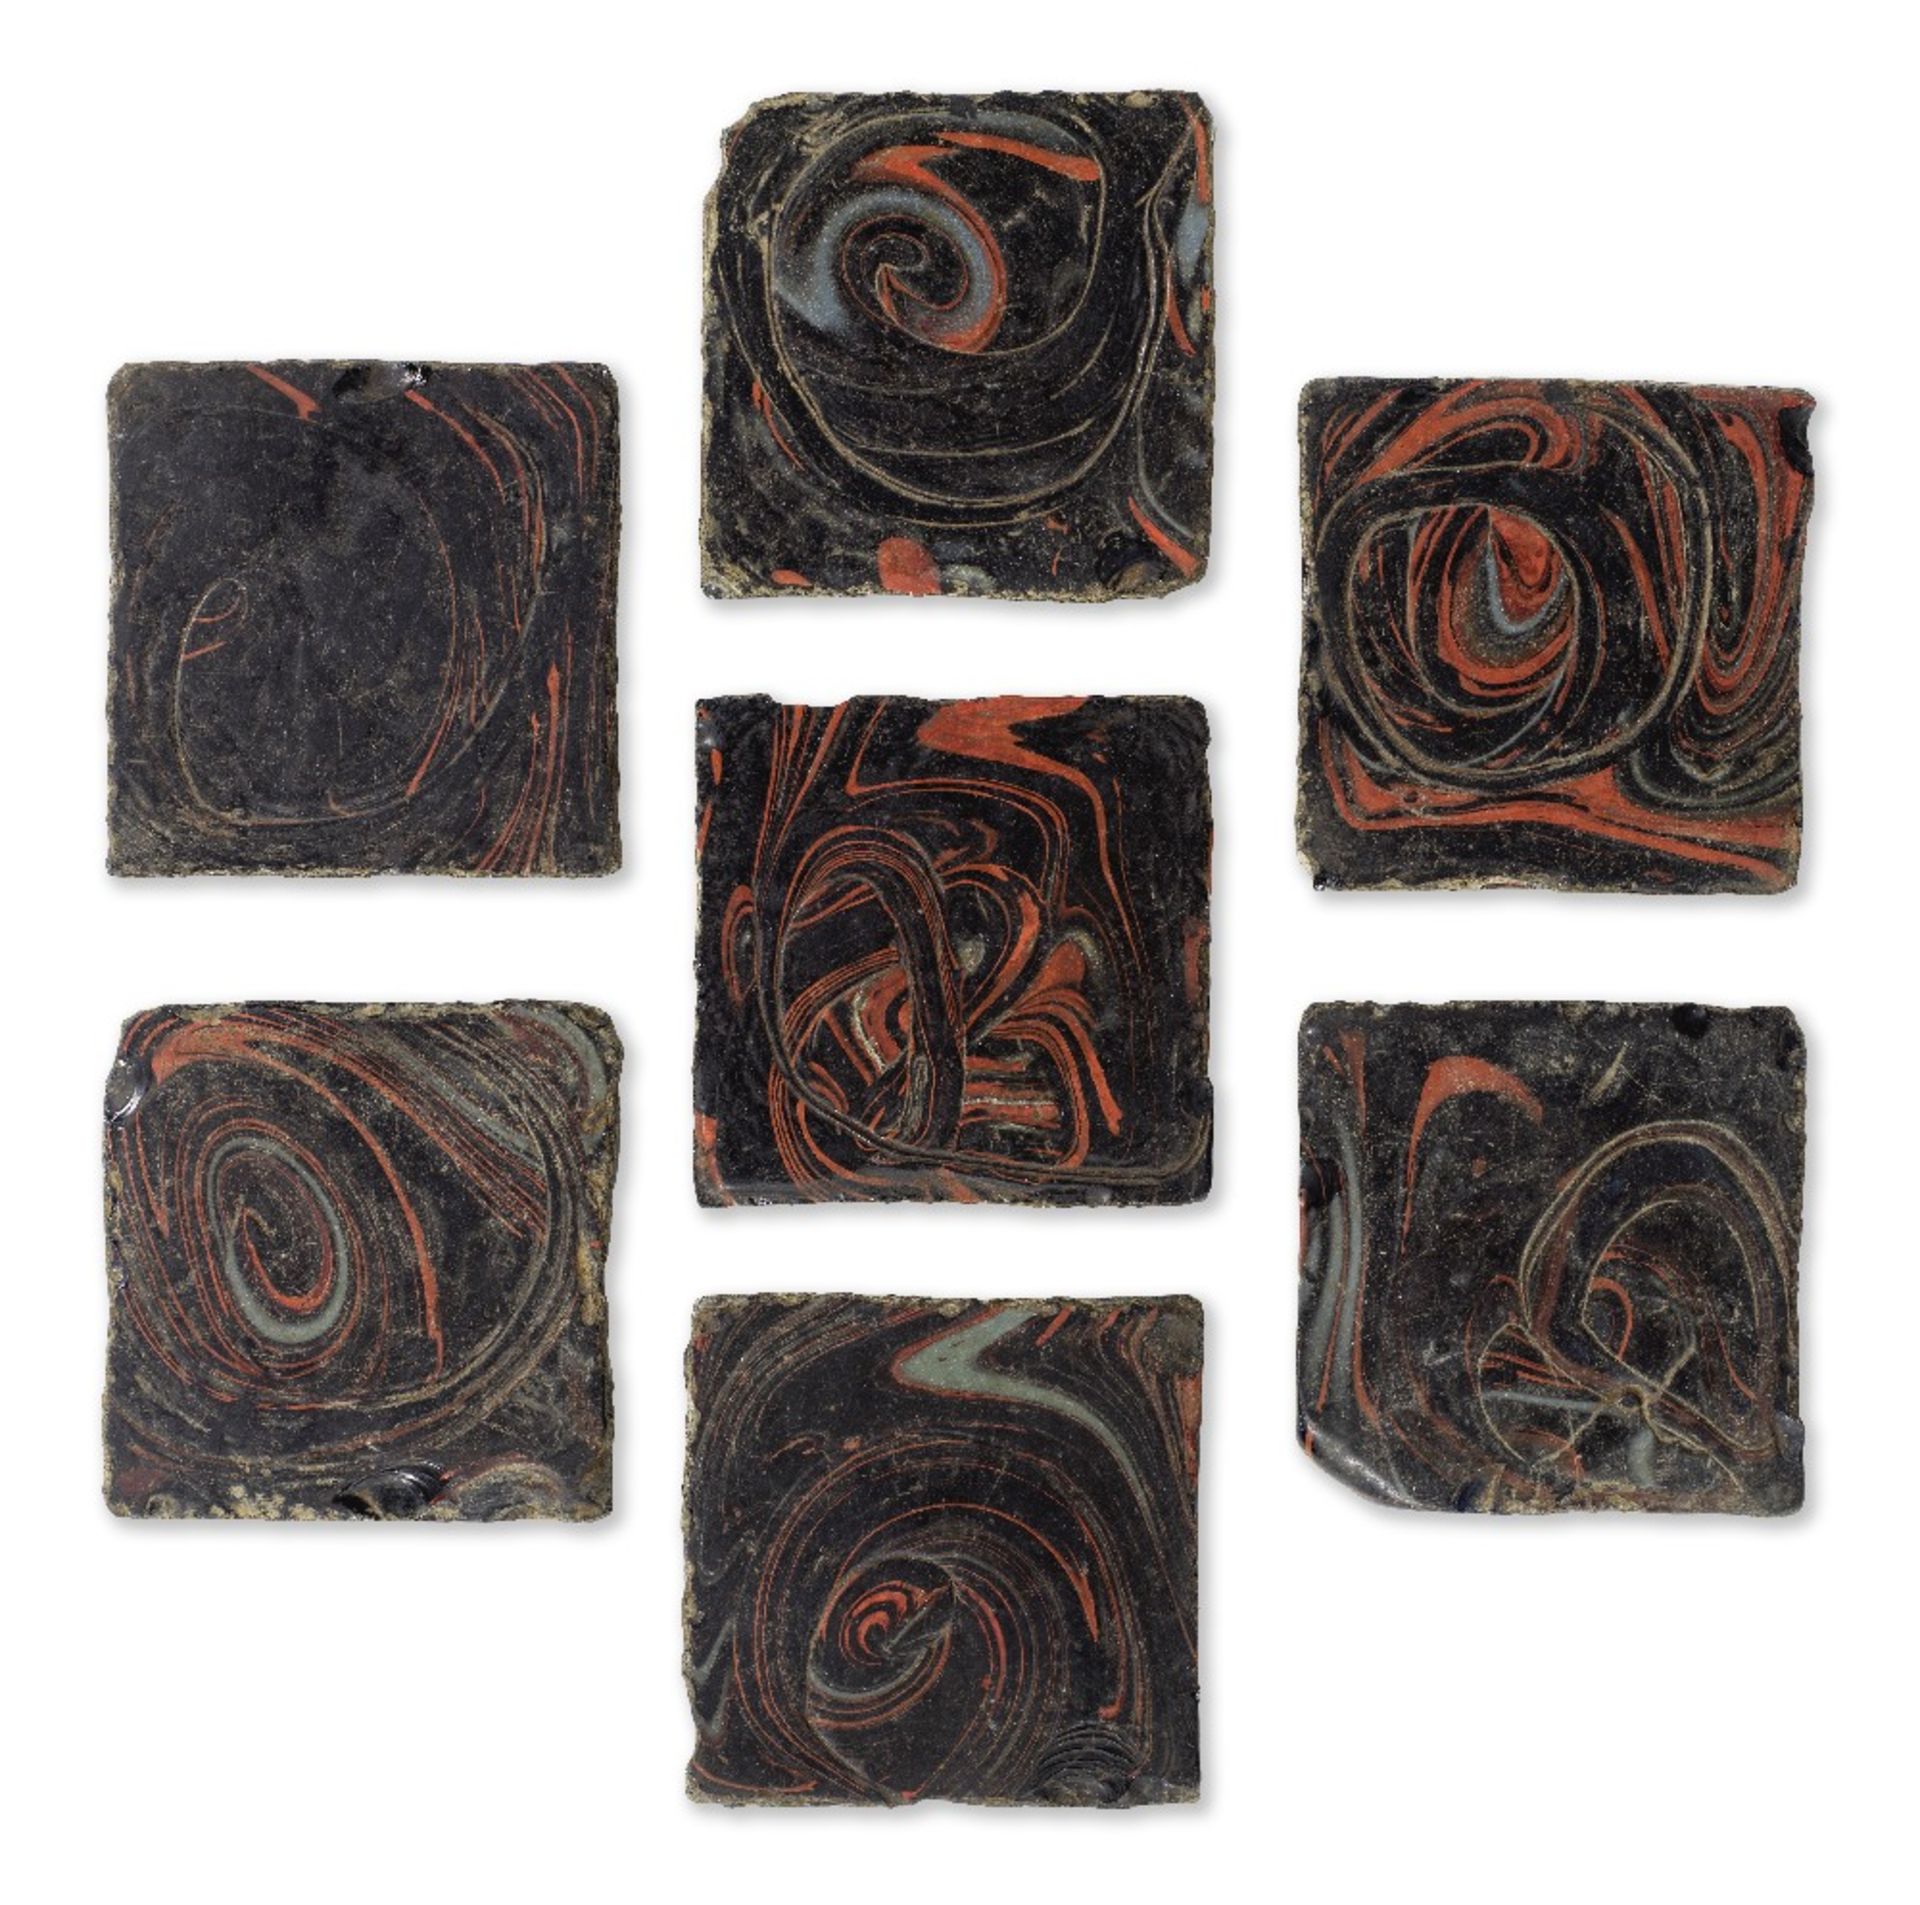 A group of early Islamic glass tiles Possibly Mesopotamia, 8th-10th Century(7)